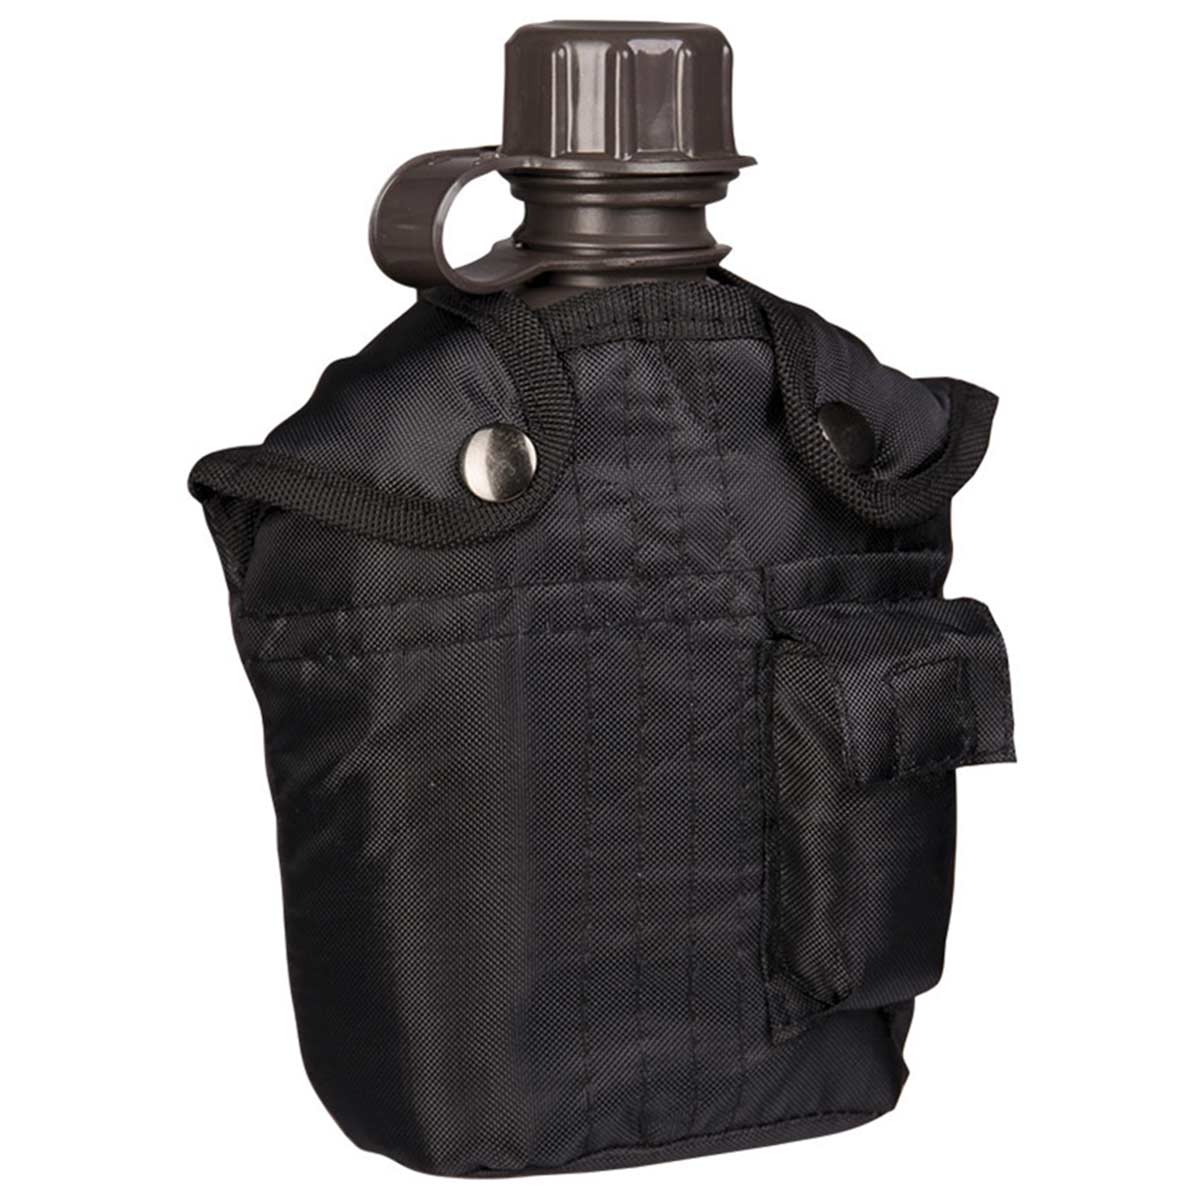 Mil-Tec US Style Canteen & Cup 